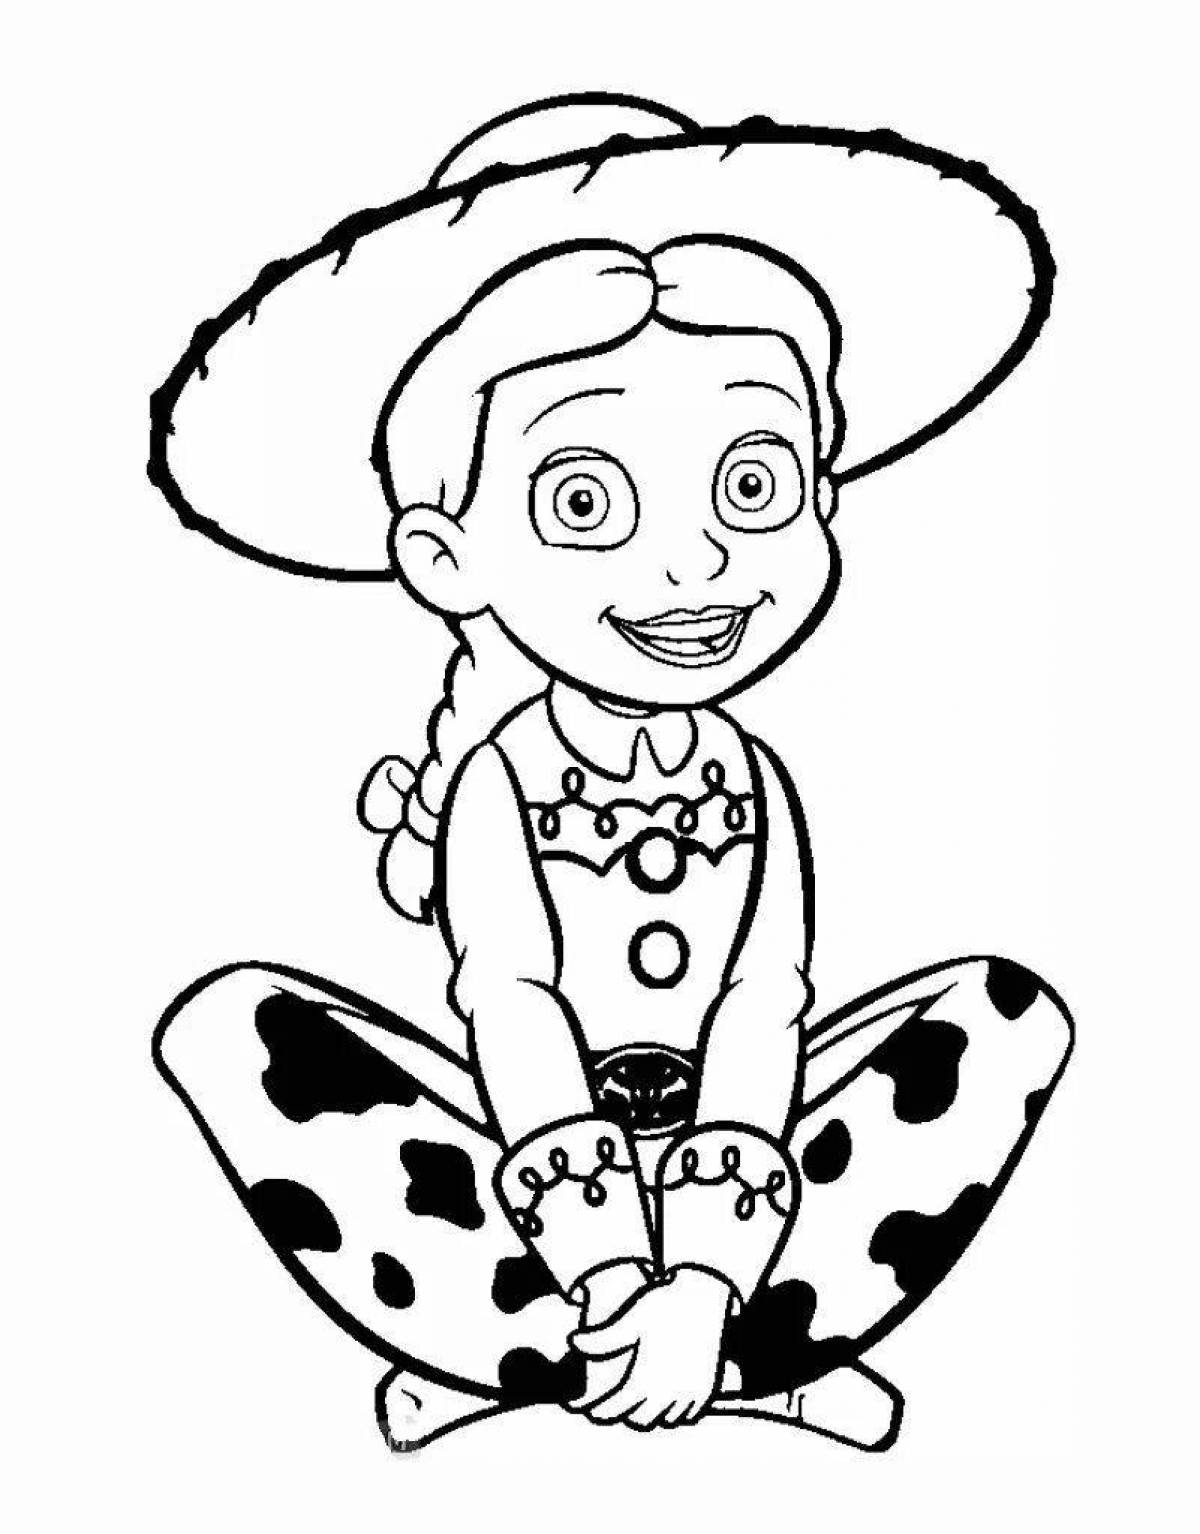 Coloring book jessie's dazzling toy story